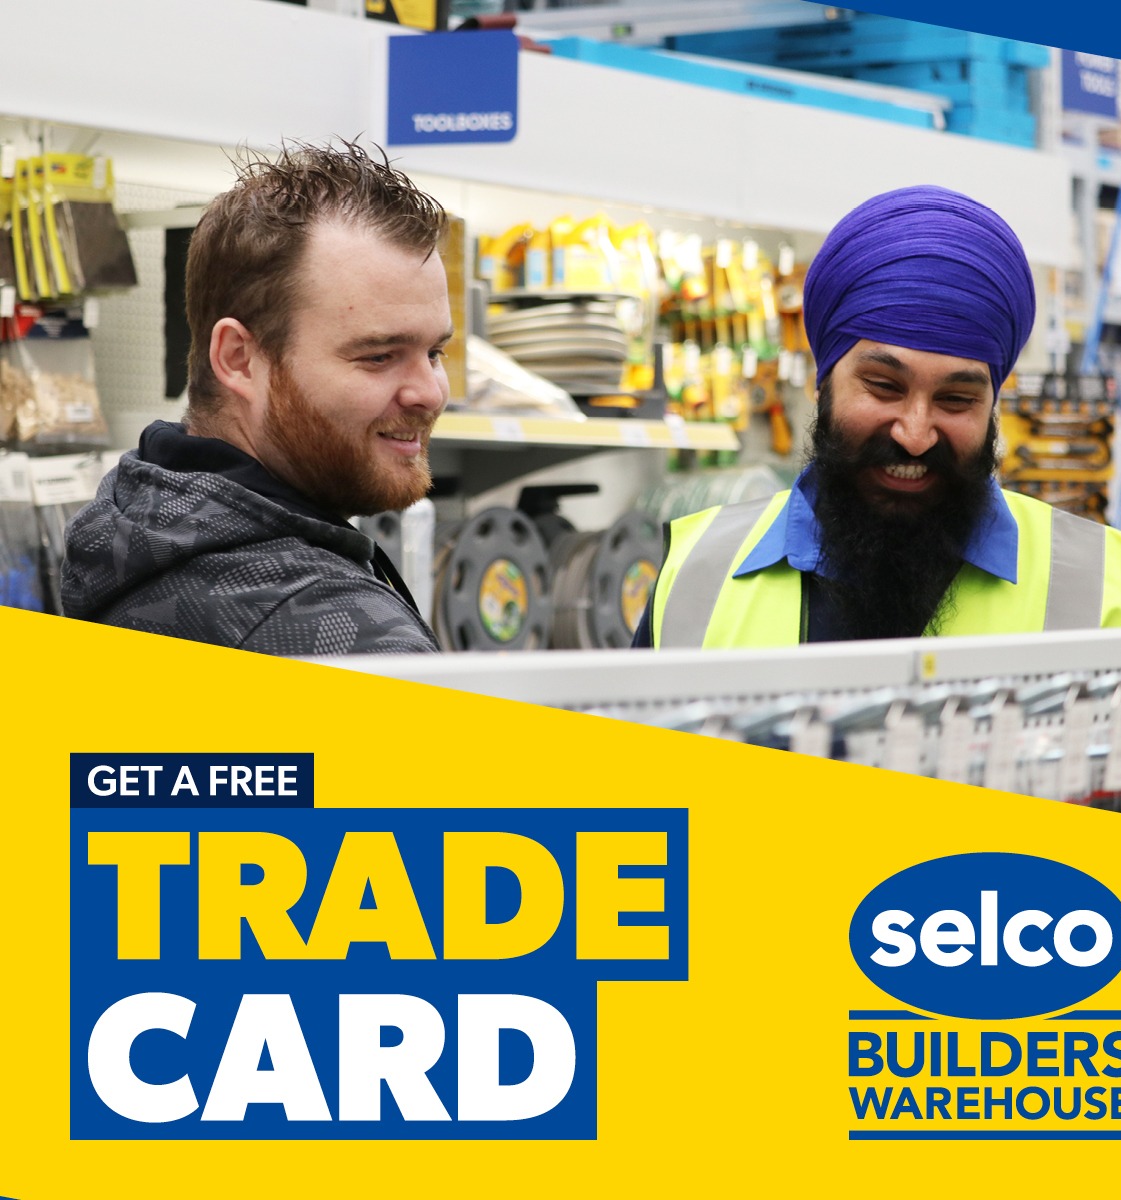 Are you a #tradesperson or business owner? You could be eligible for a Trade Card! Exclusively for the Trade, start shopping straight away with Click & Collect or Click & Deliver, one of our delivery services or in branch 🤩 Sign up today 👉 bit.ly/3Js9aSg #Selco